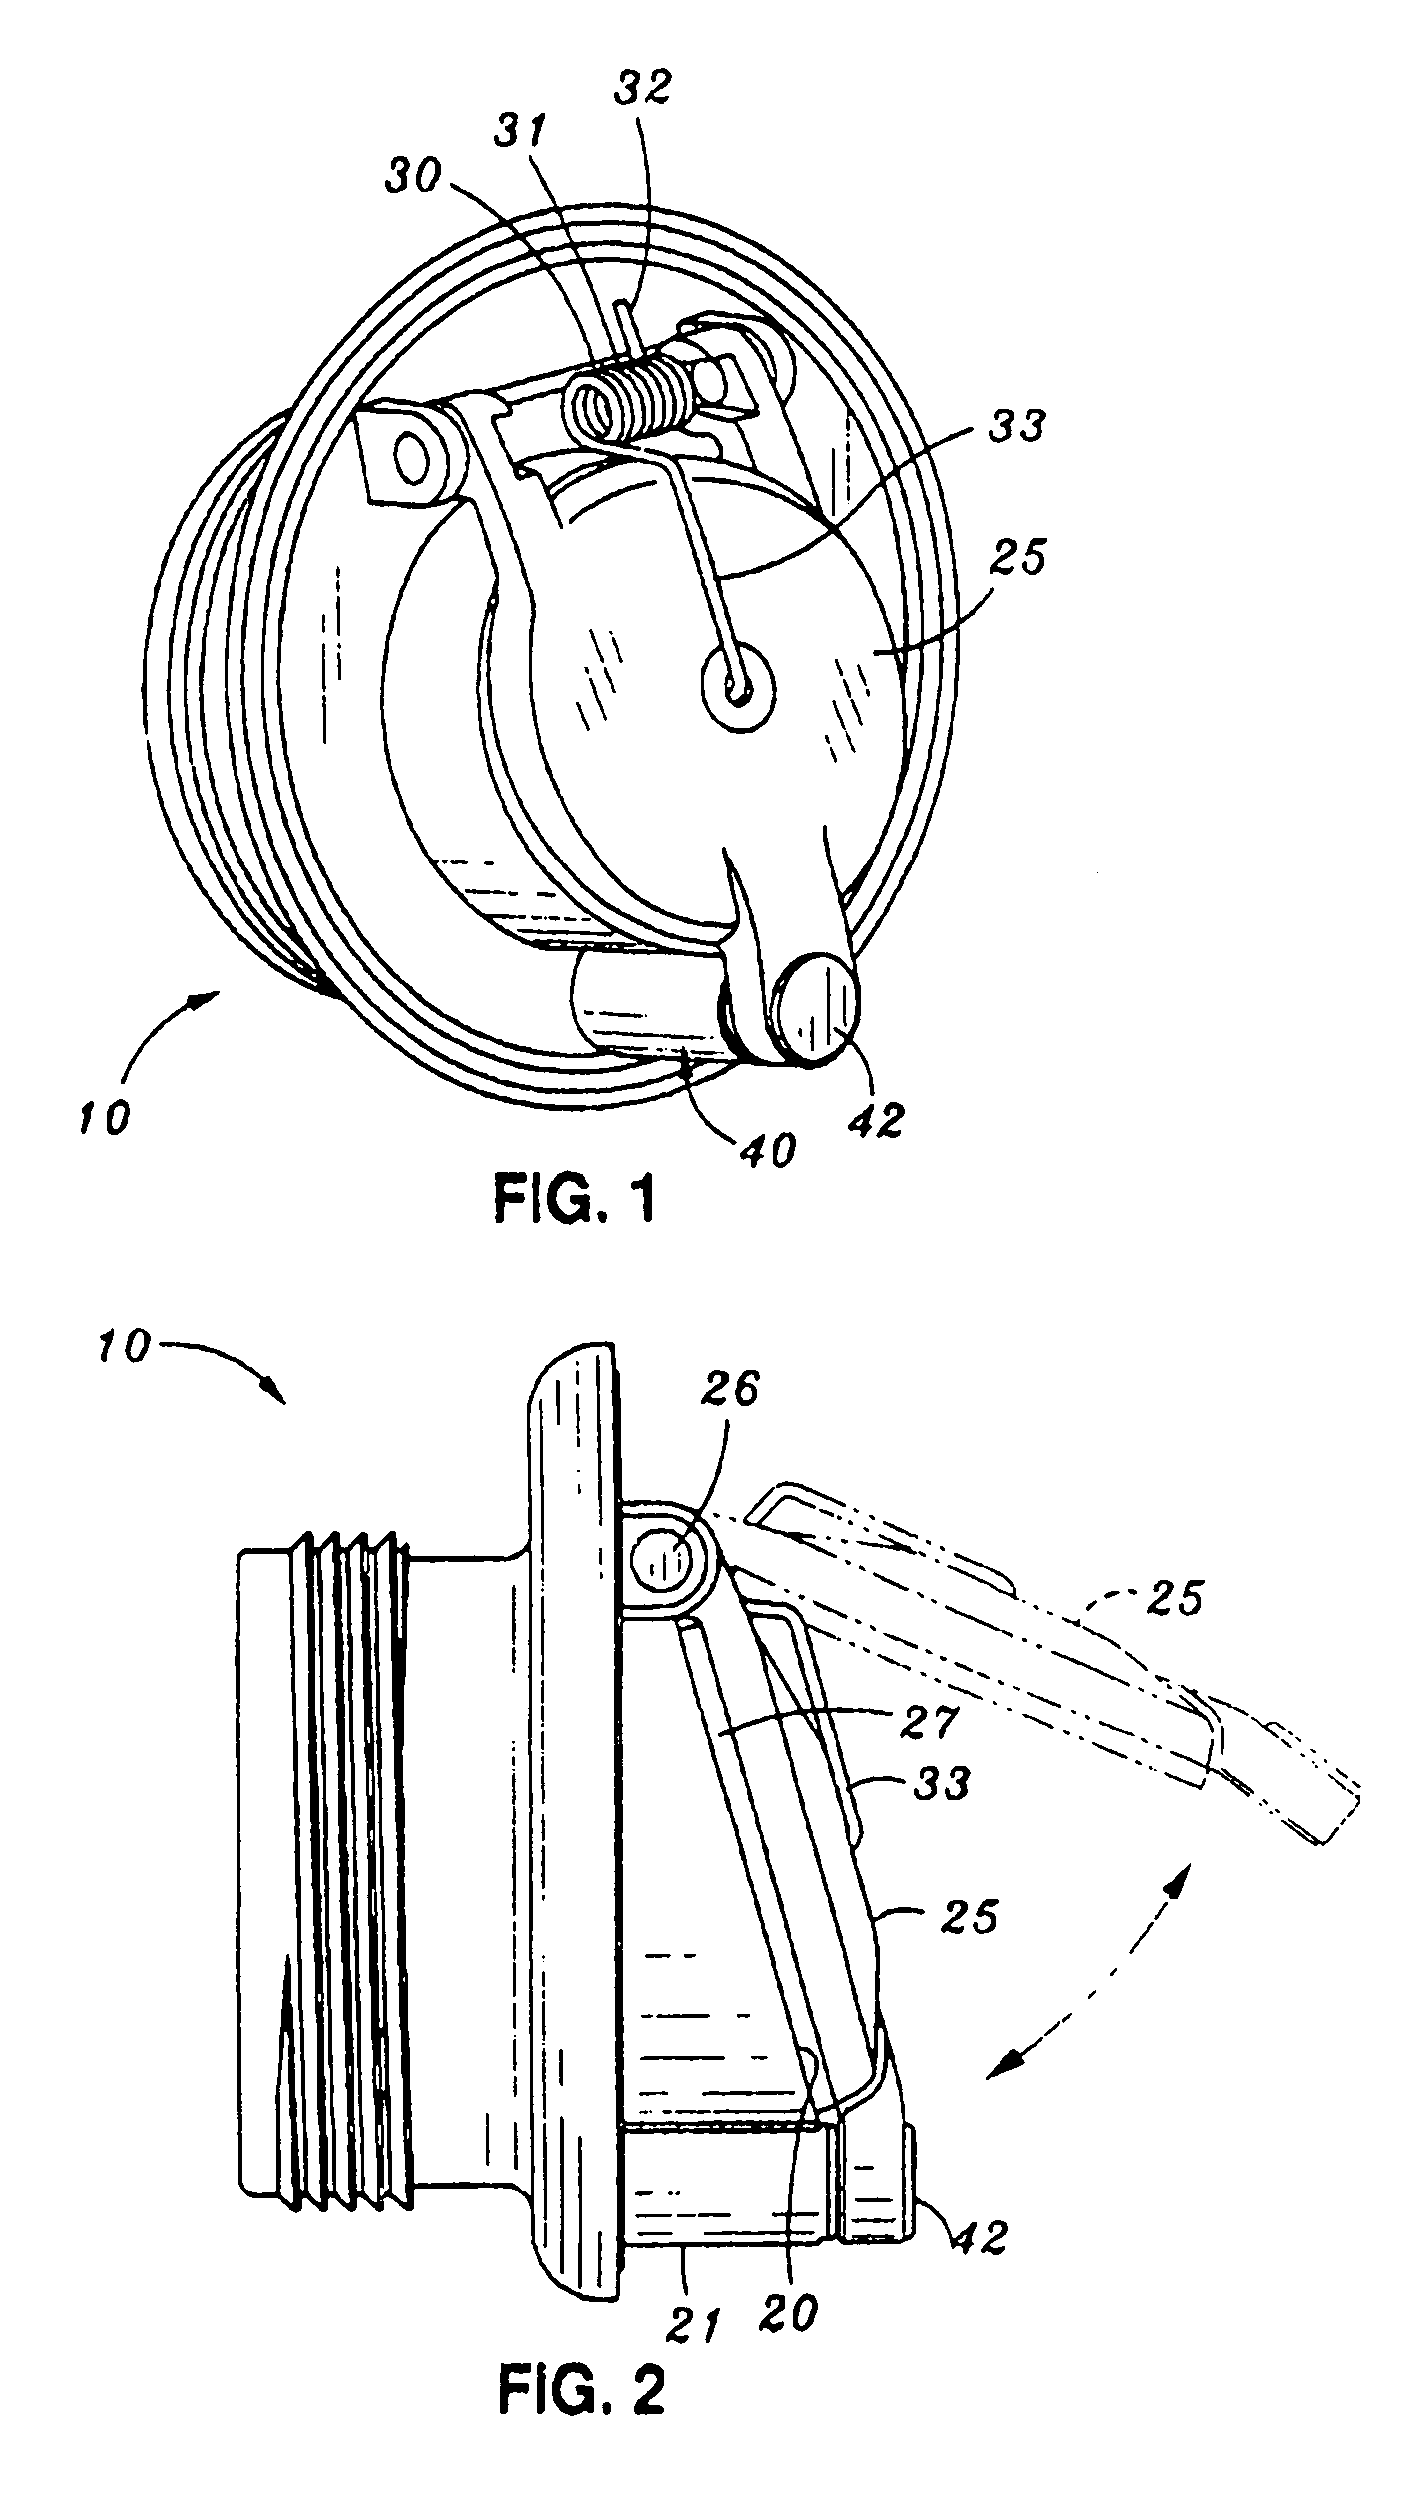 Quickly opening hinged check valve with pre-determined upstream pressure required to open